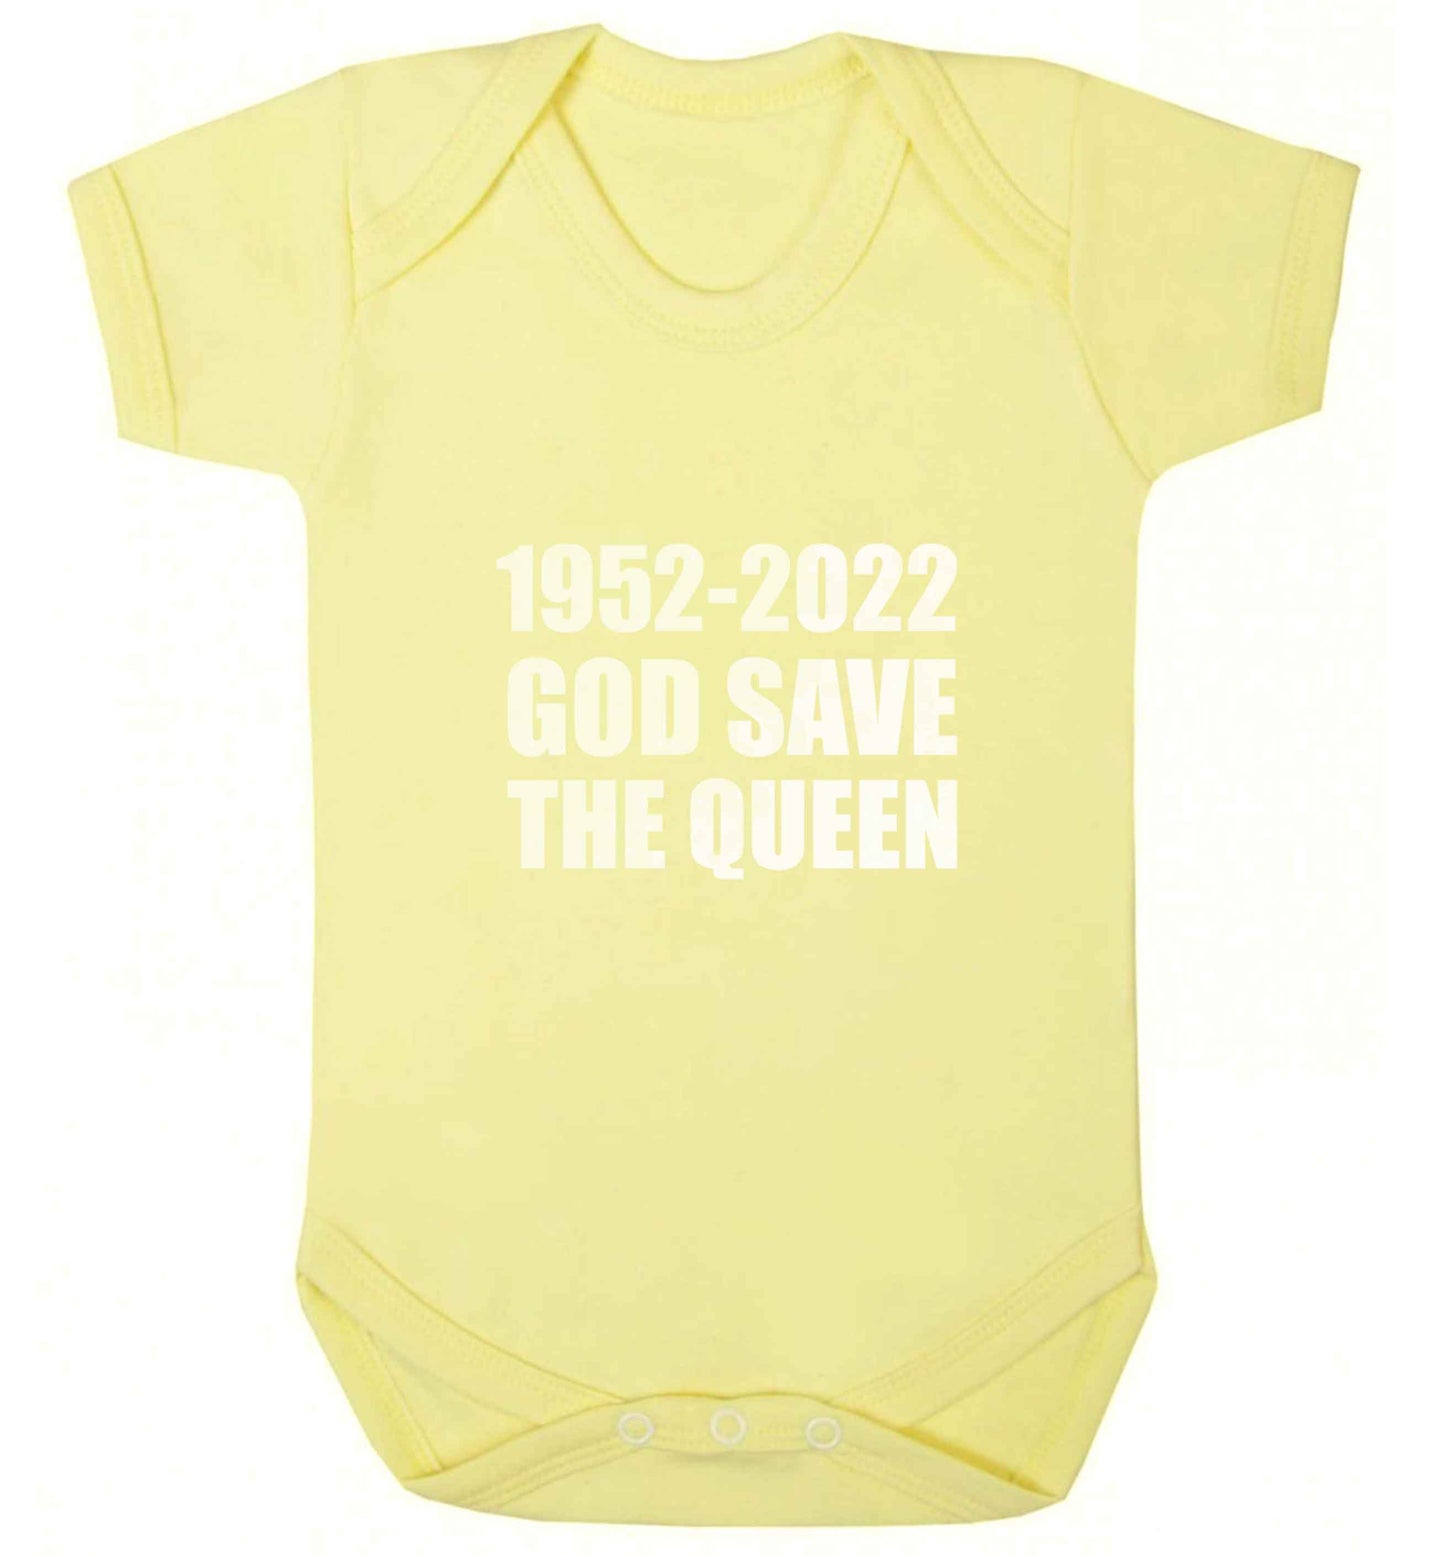 God save the queen baby vest pale yellow 18-24 months